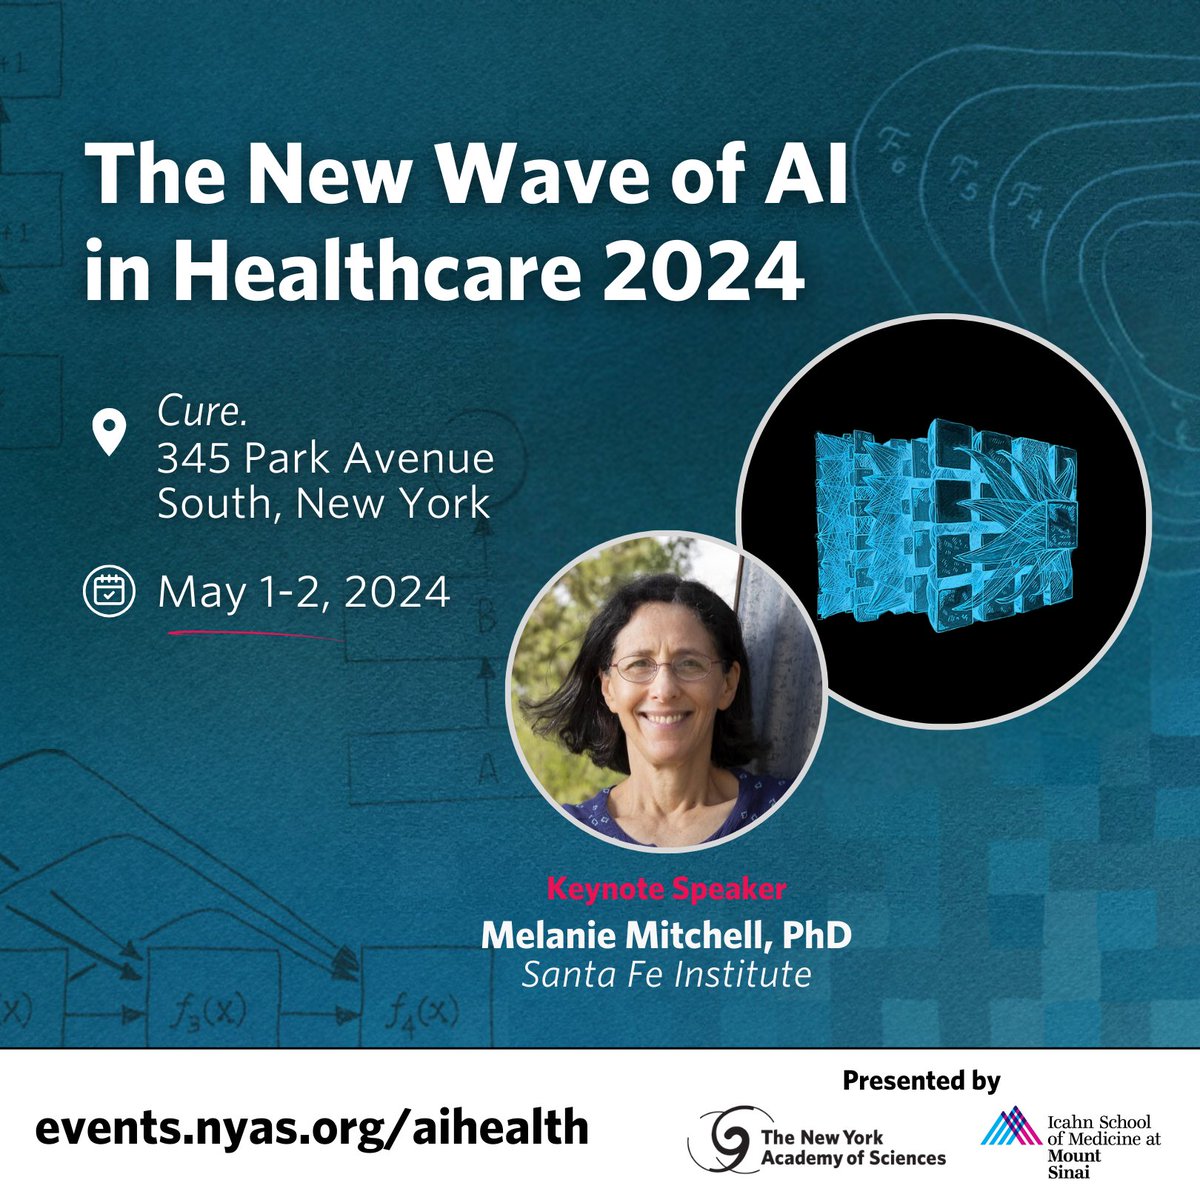 Sign up for The New Wave of AI in Healthcare 2024 to hear from keynote speaker Dr. Melanie Mitchell (@MelMitchell1) on 'The Past, Present, and Uncertain Futures of AI' #NewWaveAIHealth 

Register today, tickets selling fast!  
🎟️: events.nyas.org/aihealth